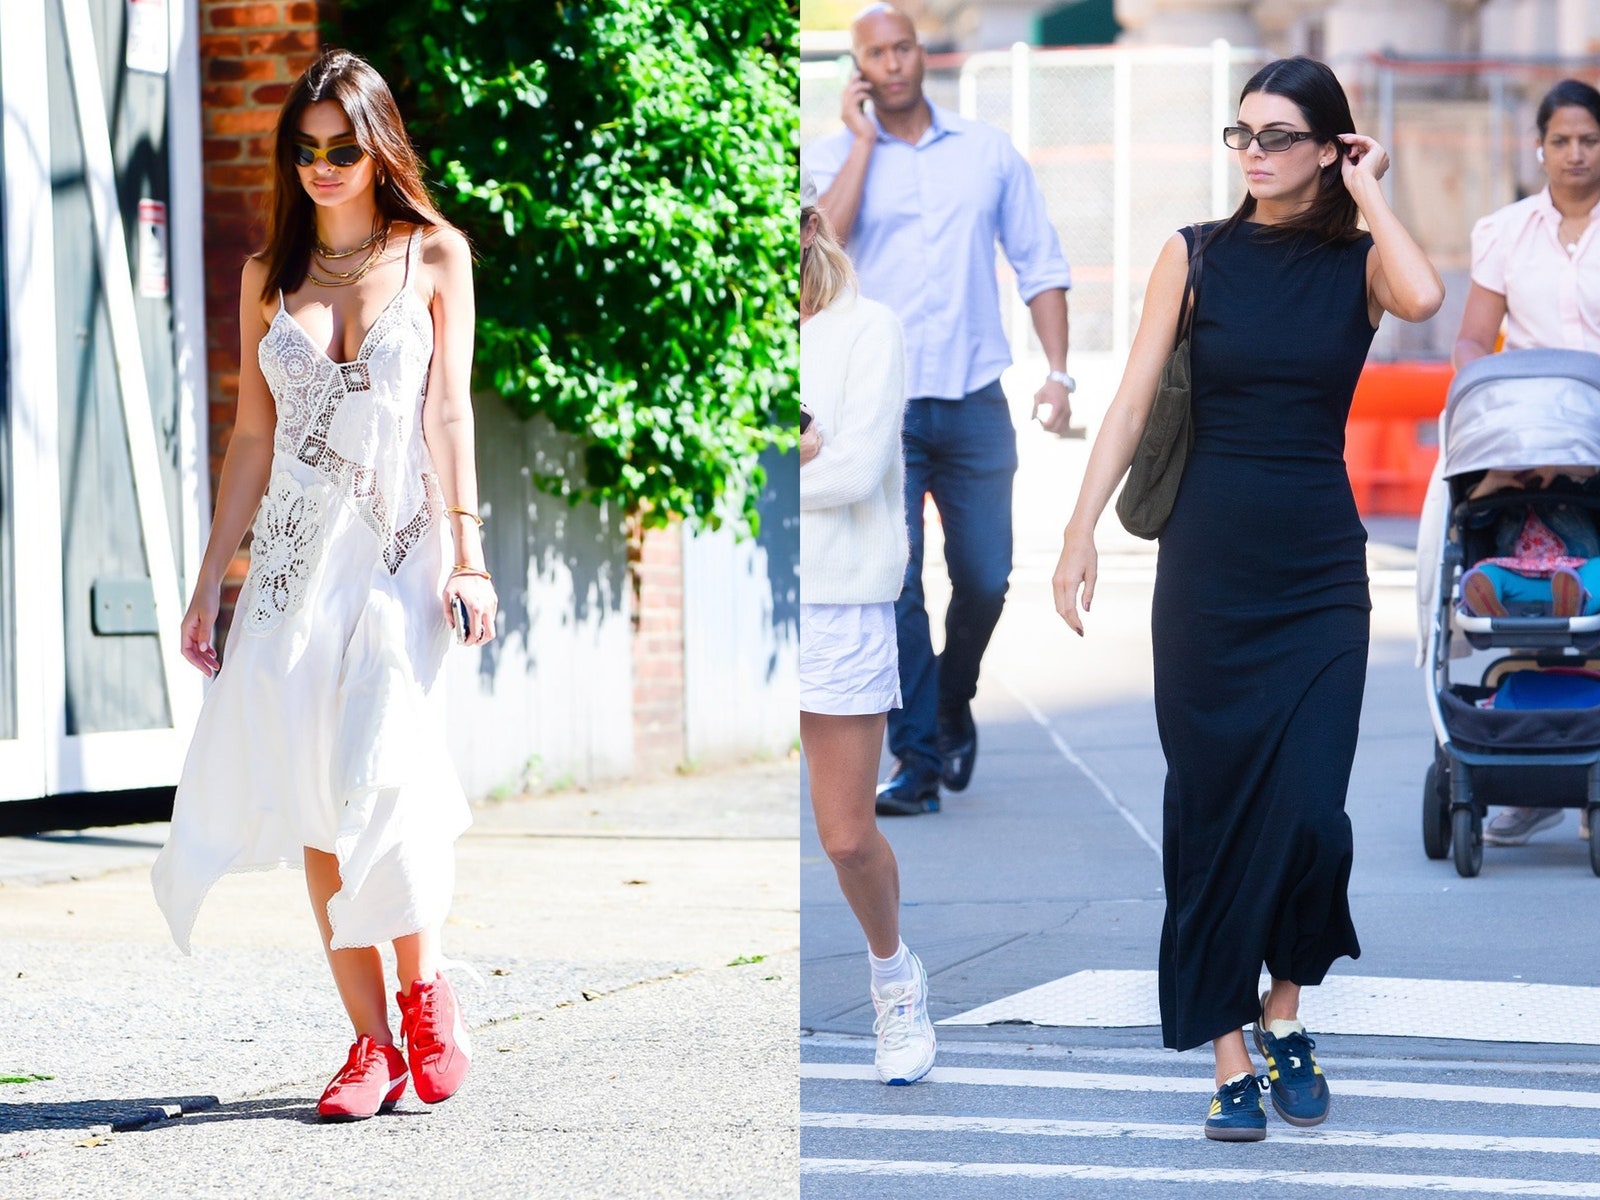 Dresses and Sneakers Are a Foolproof Outfit Combo for Summer